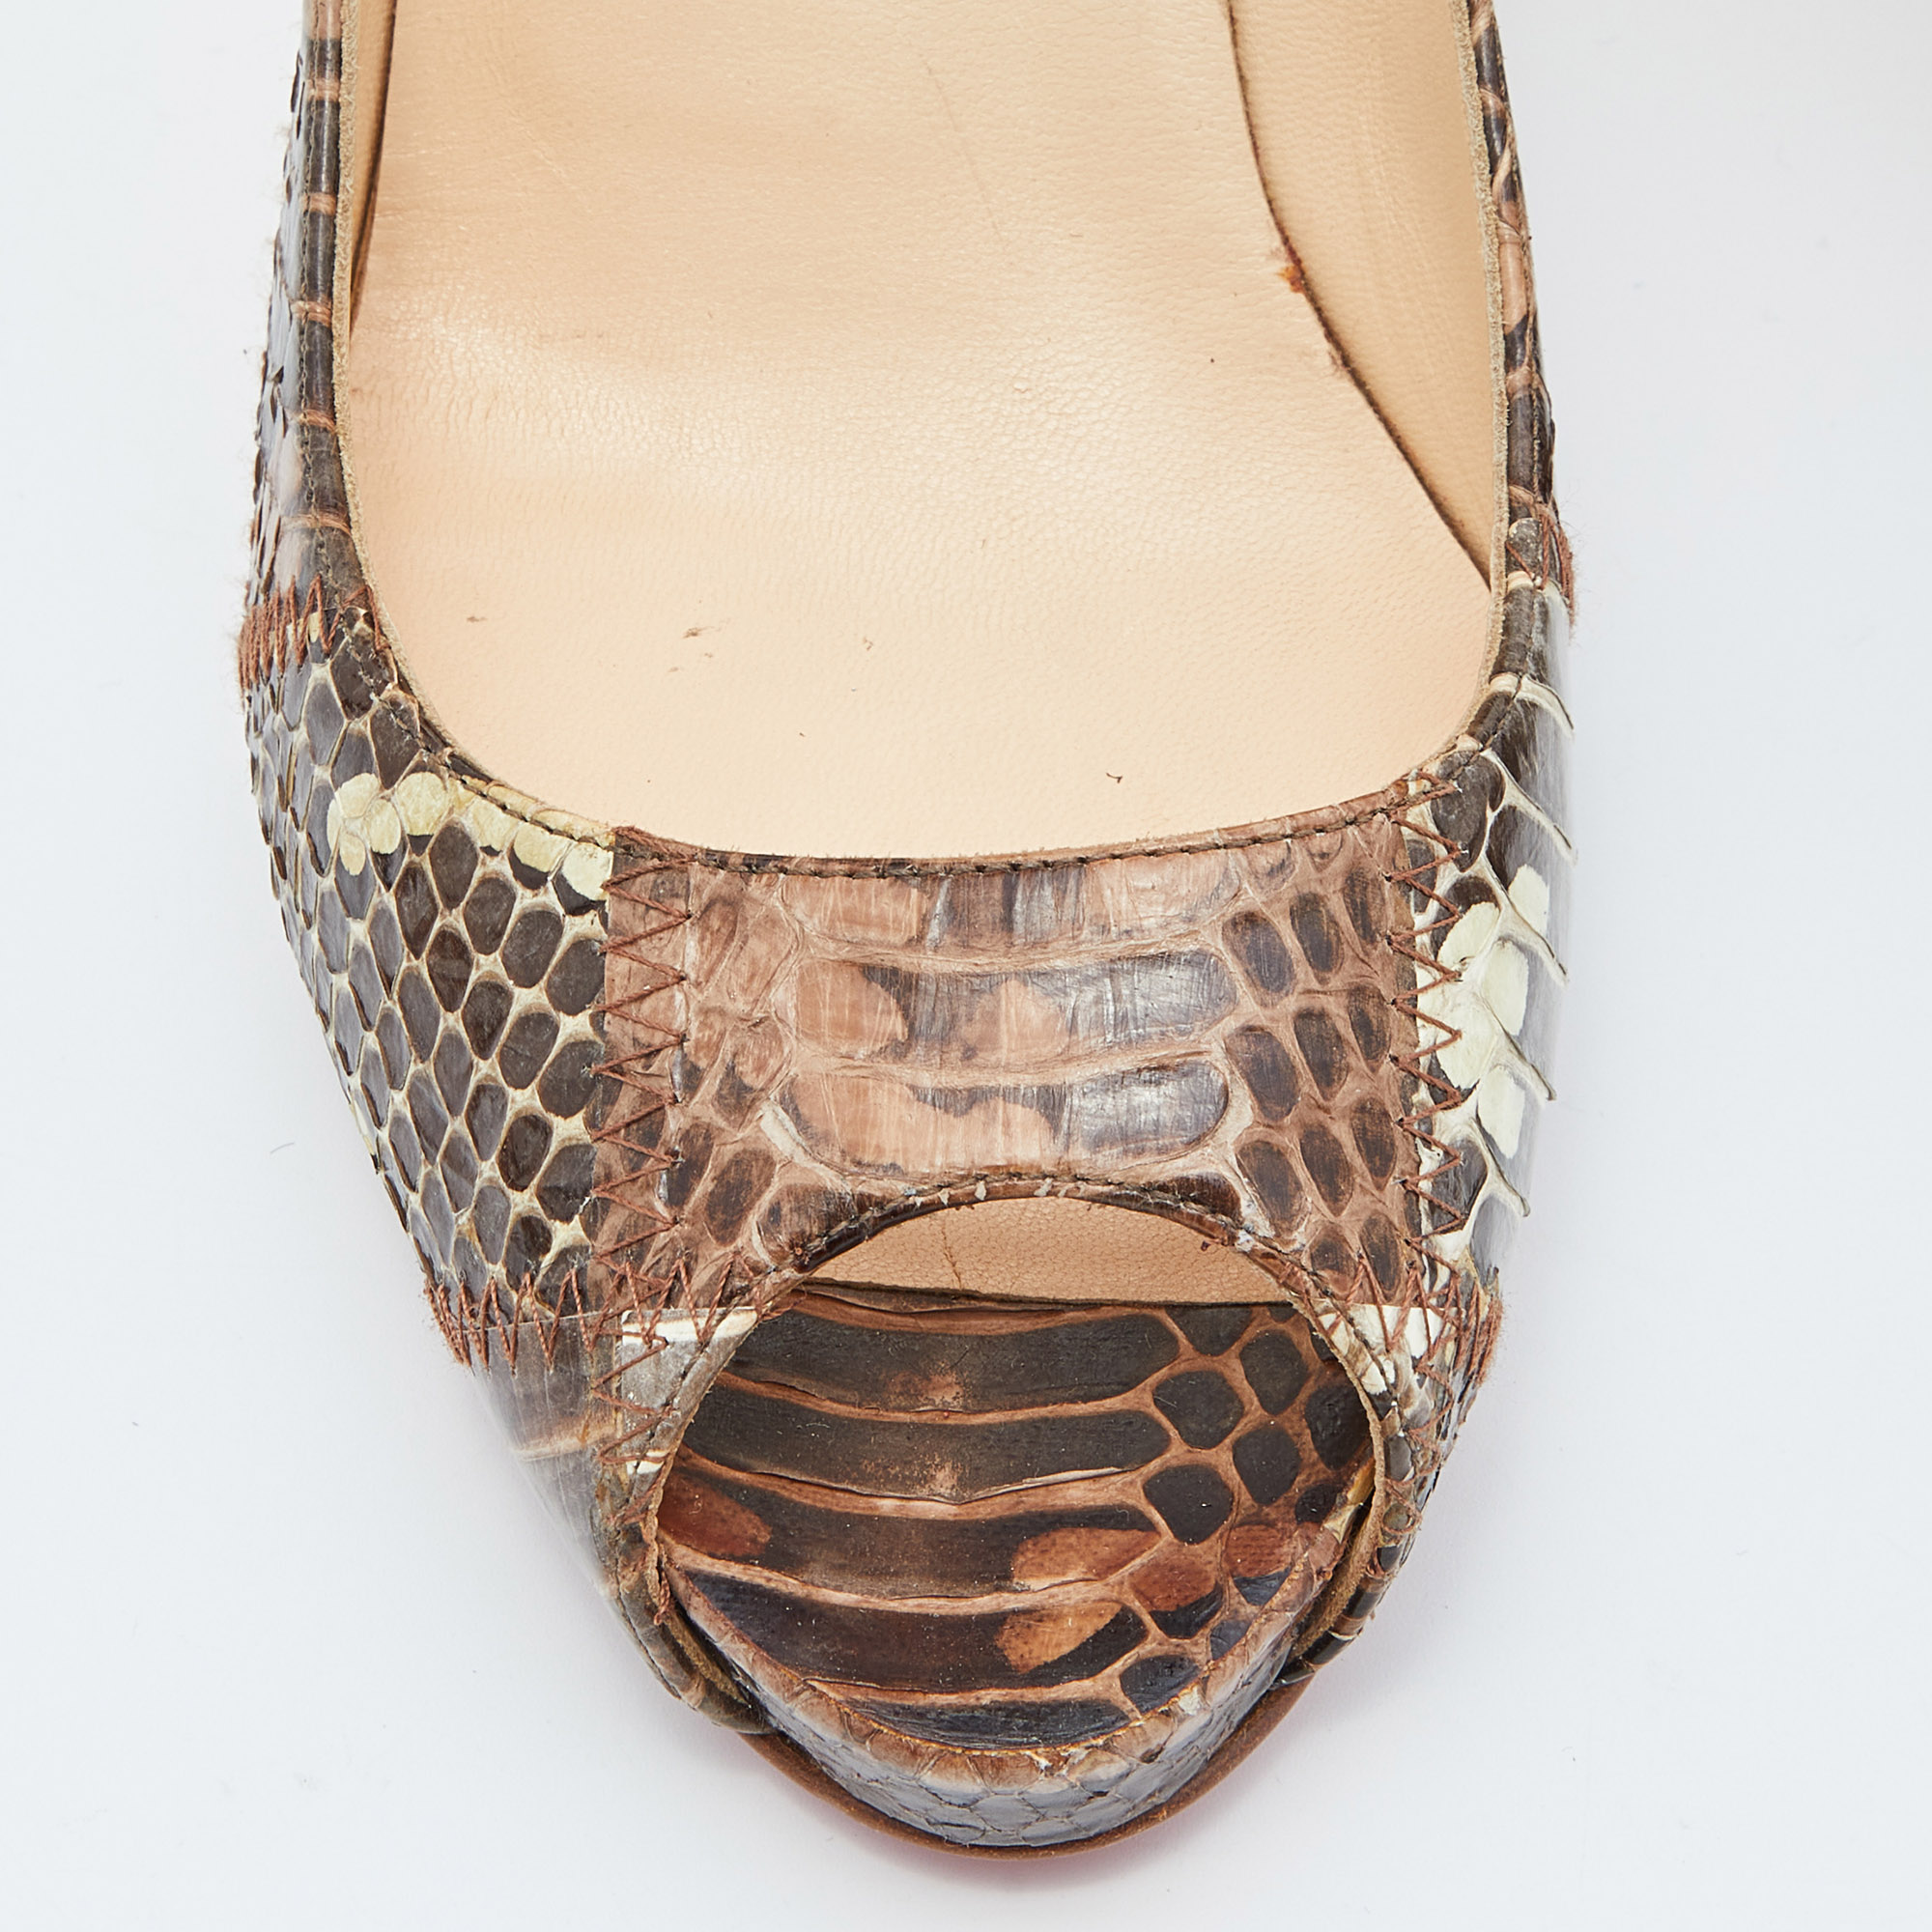 Christian Louboutin Brown Watersnake Leather Very Prive Peep Toe Pumps Size 37